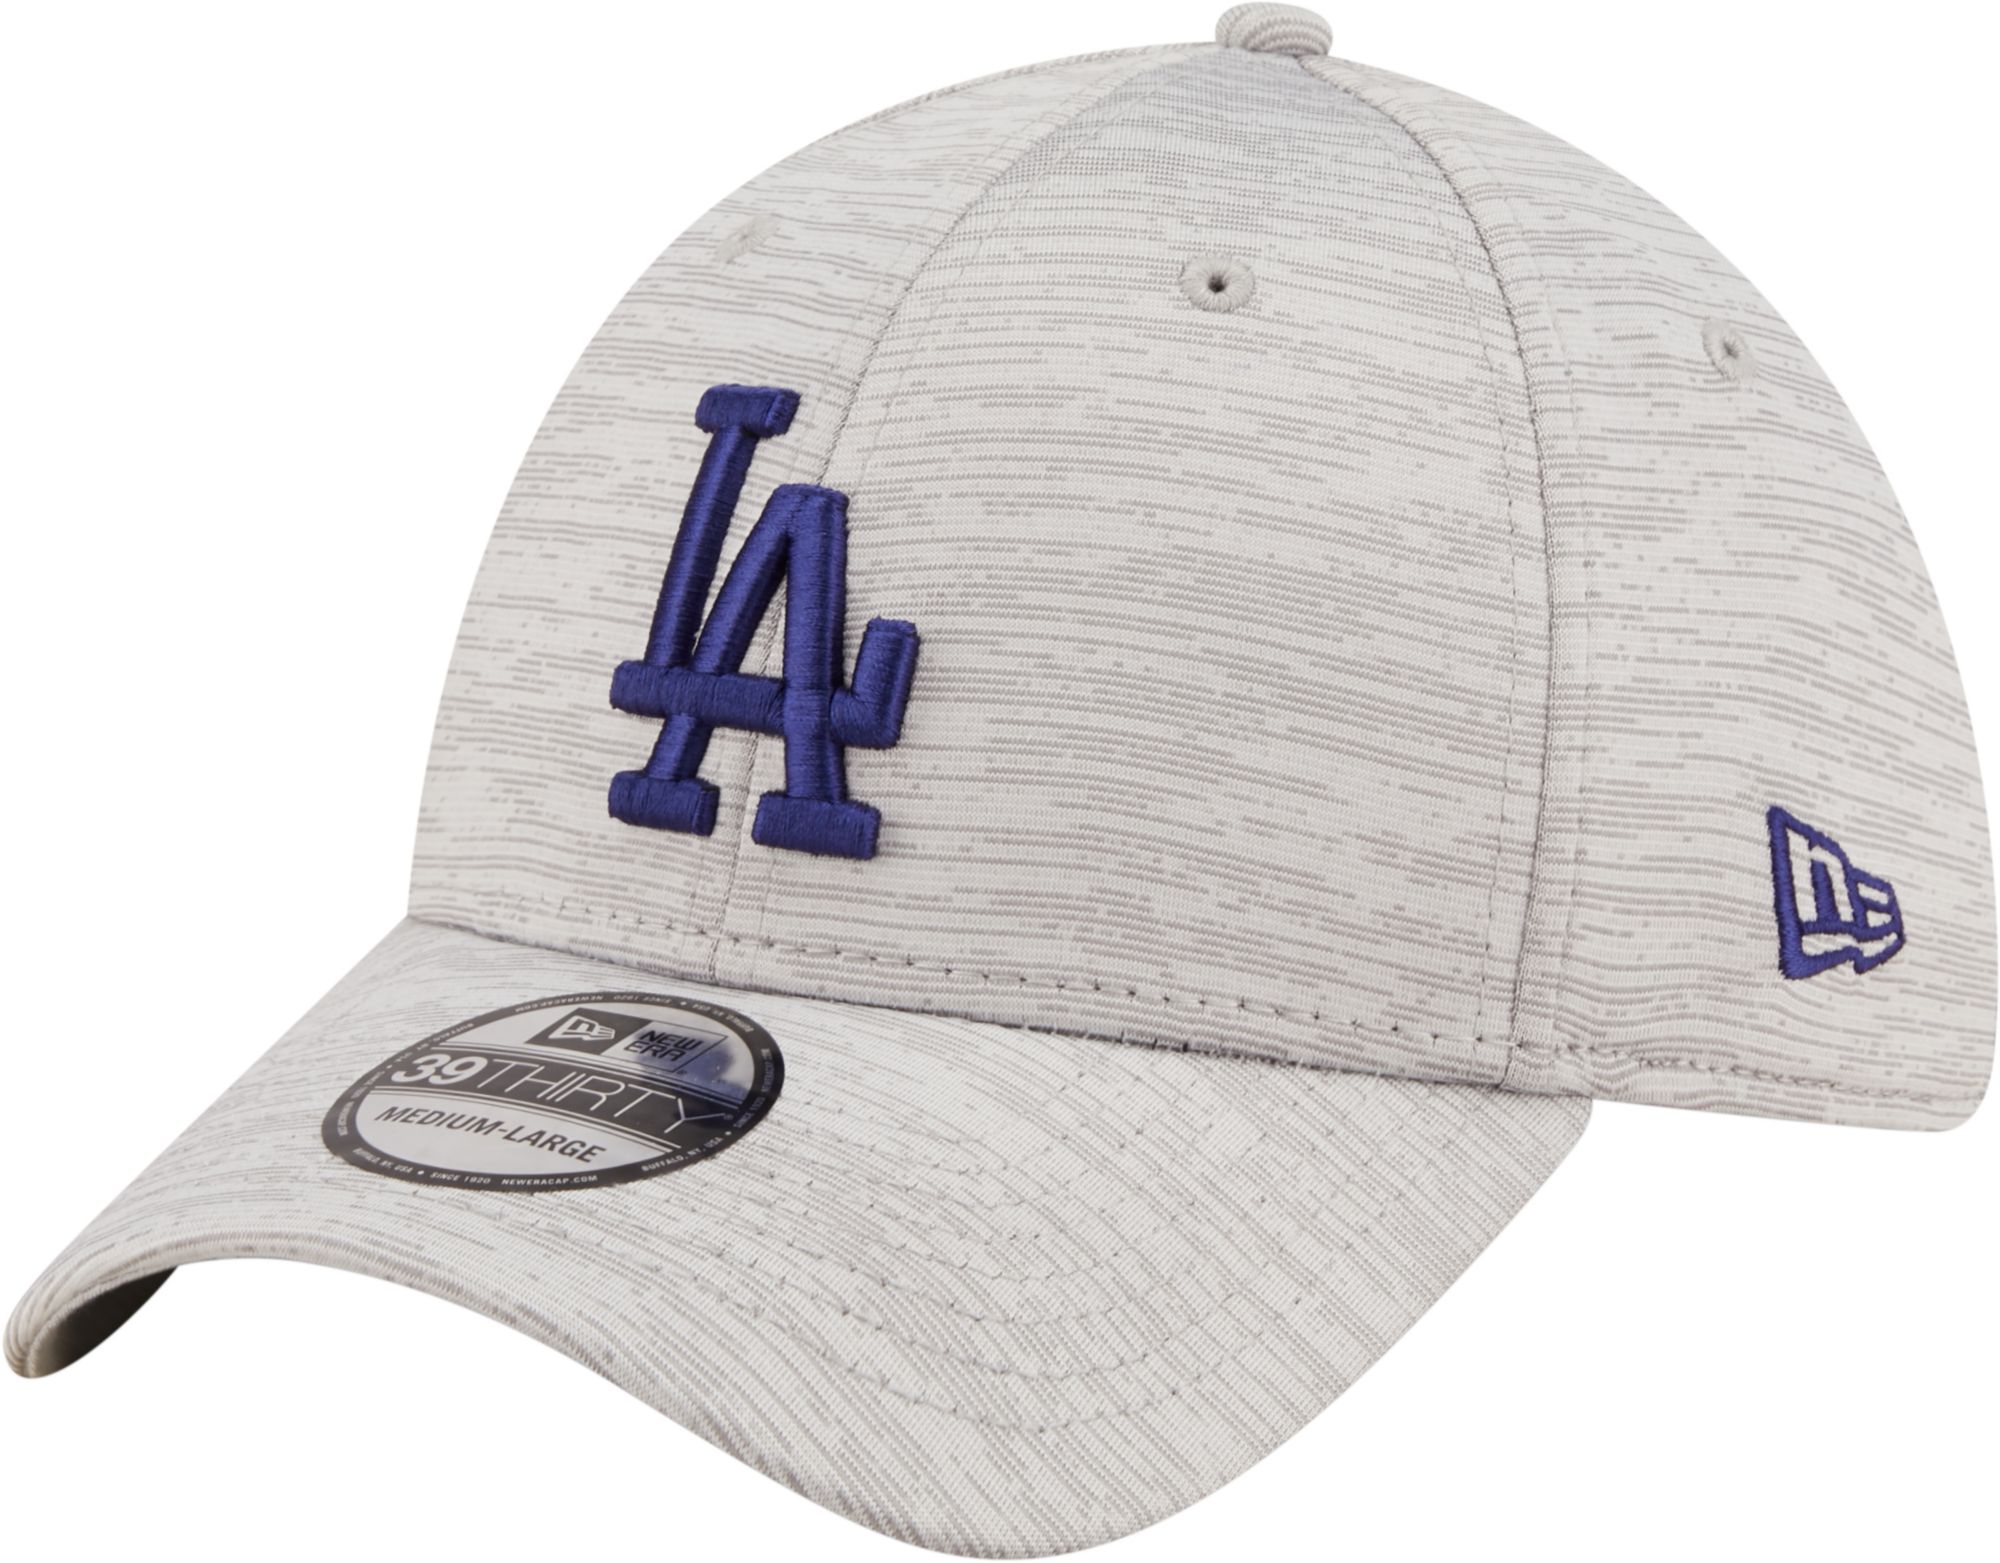 New Era / Men's Los Angeles Dodgers Gray 39Thirty Stretch Fit Hat